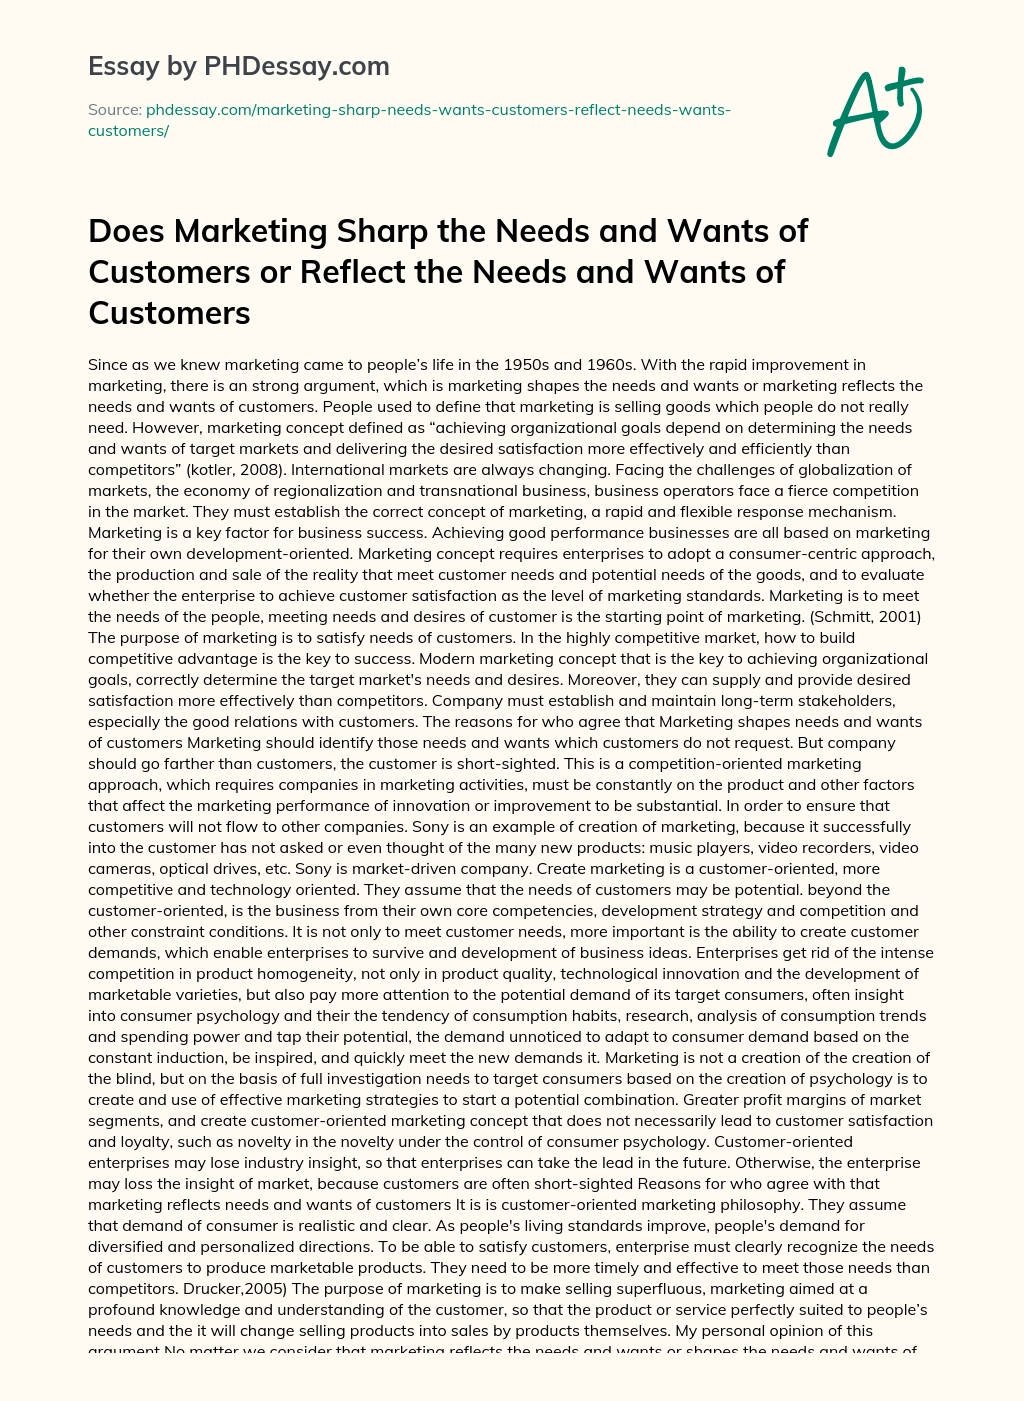 Does Marketing Sharp the Needs and Wants of Customers or Reflect the Needs and Wants of Customers essay